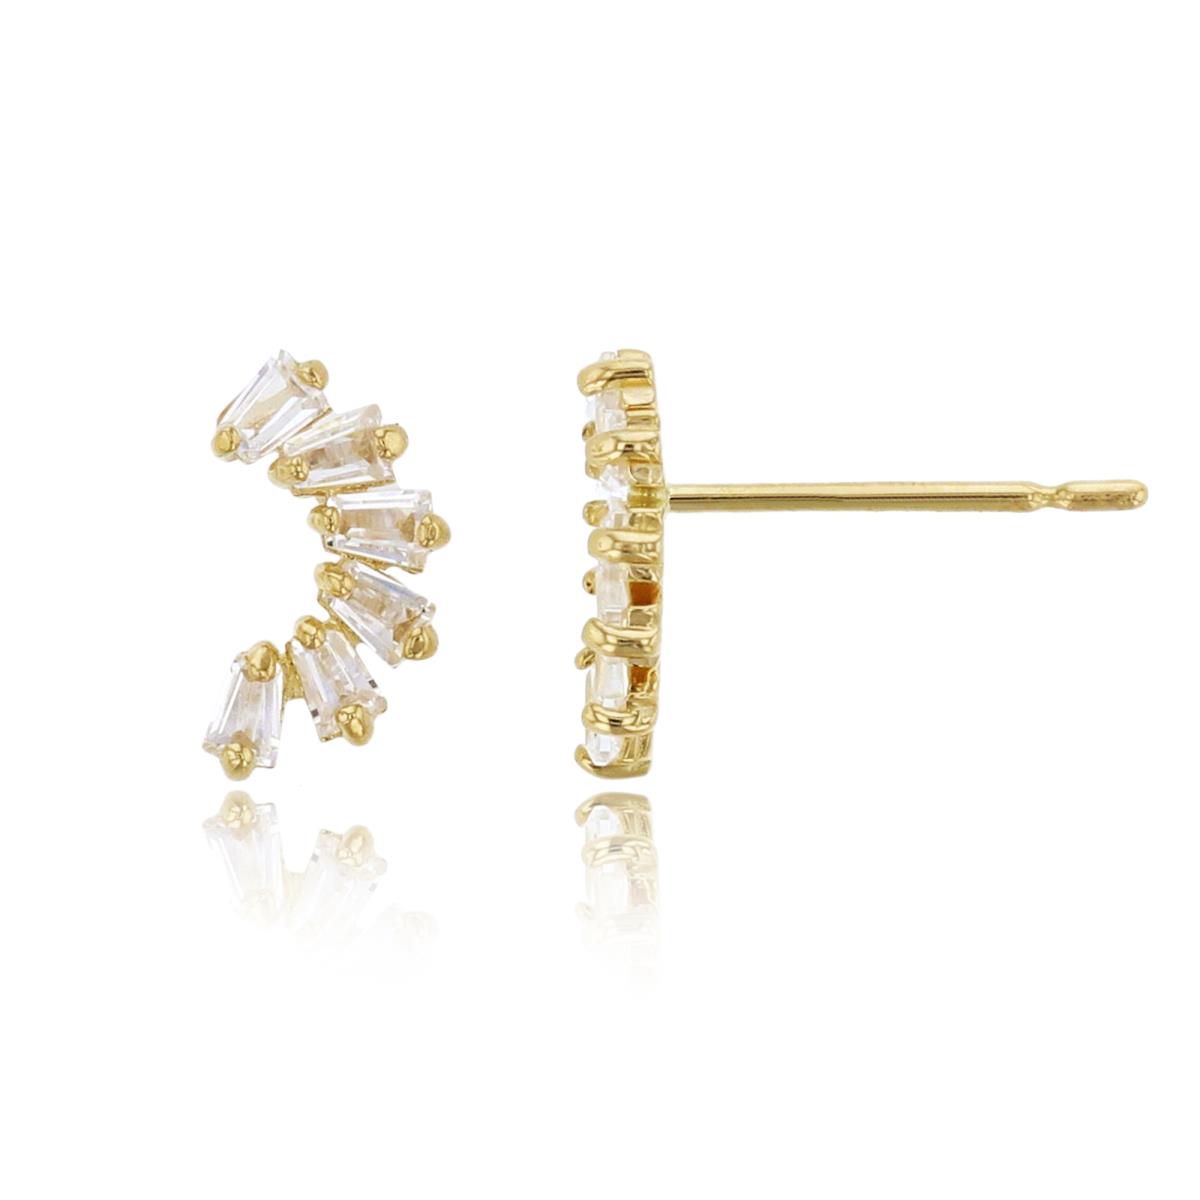 14K Yellow Gold 8x4mm Baguette CZ Curved Stud Earring